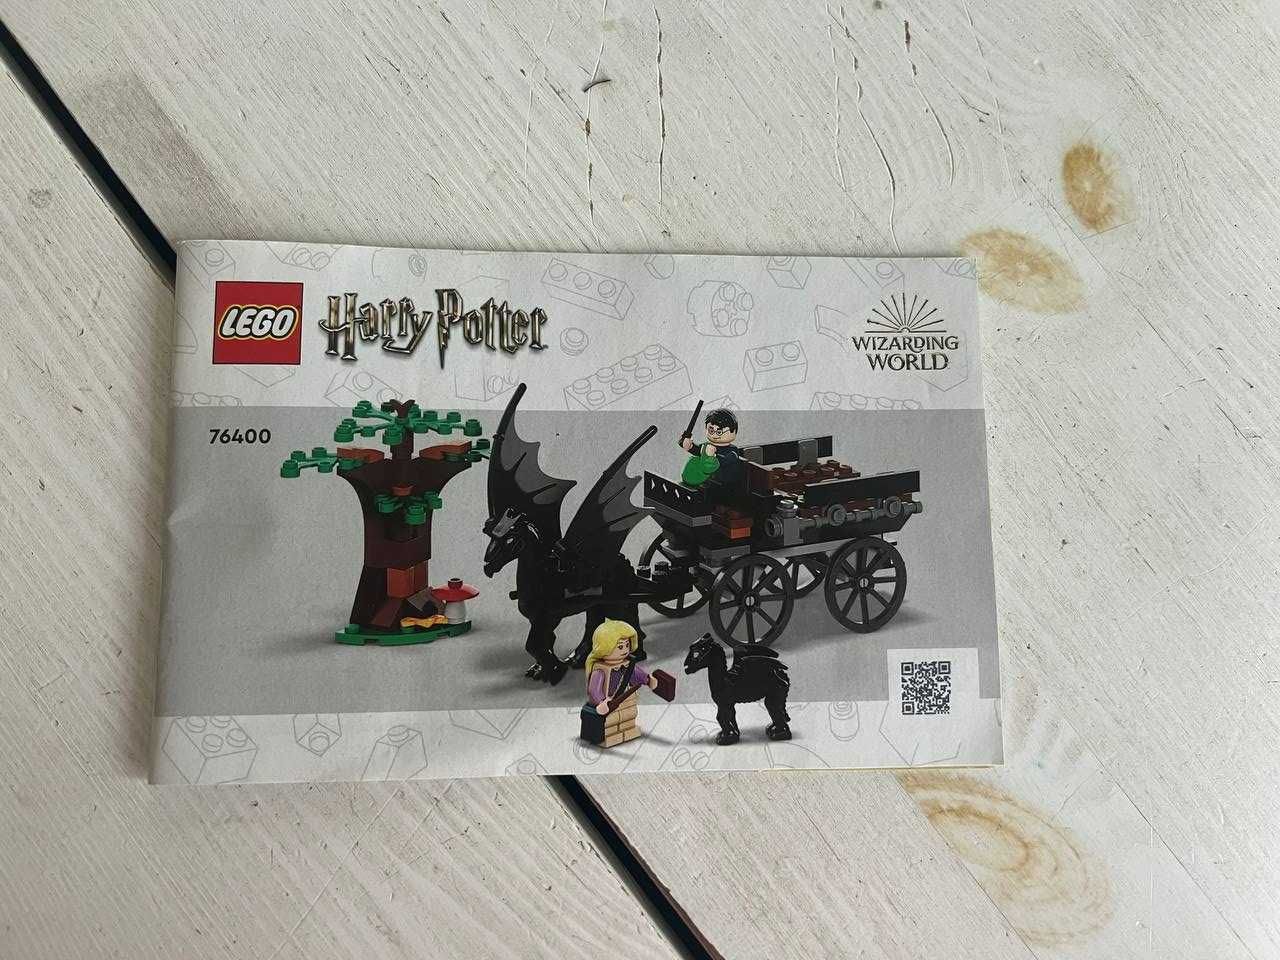 Lego Harry Potter 76400 Hogwarts Carriage and Thestrals карета